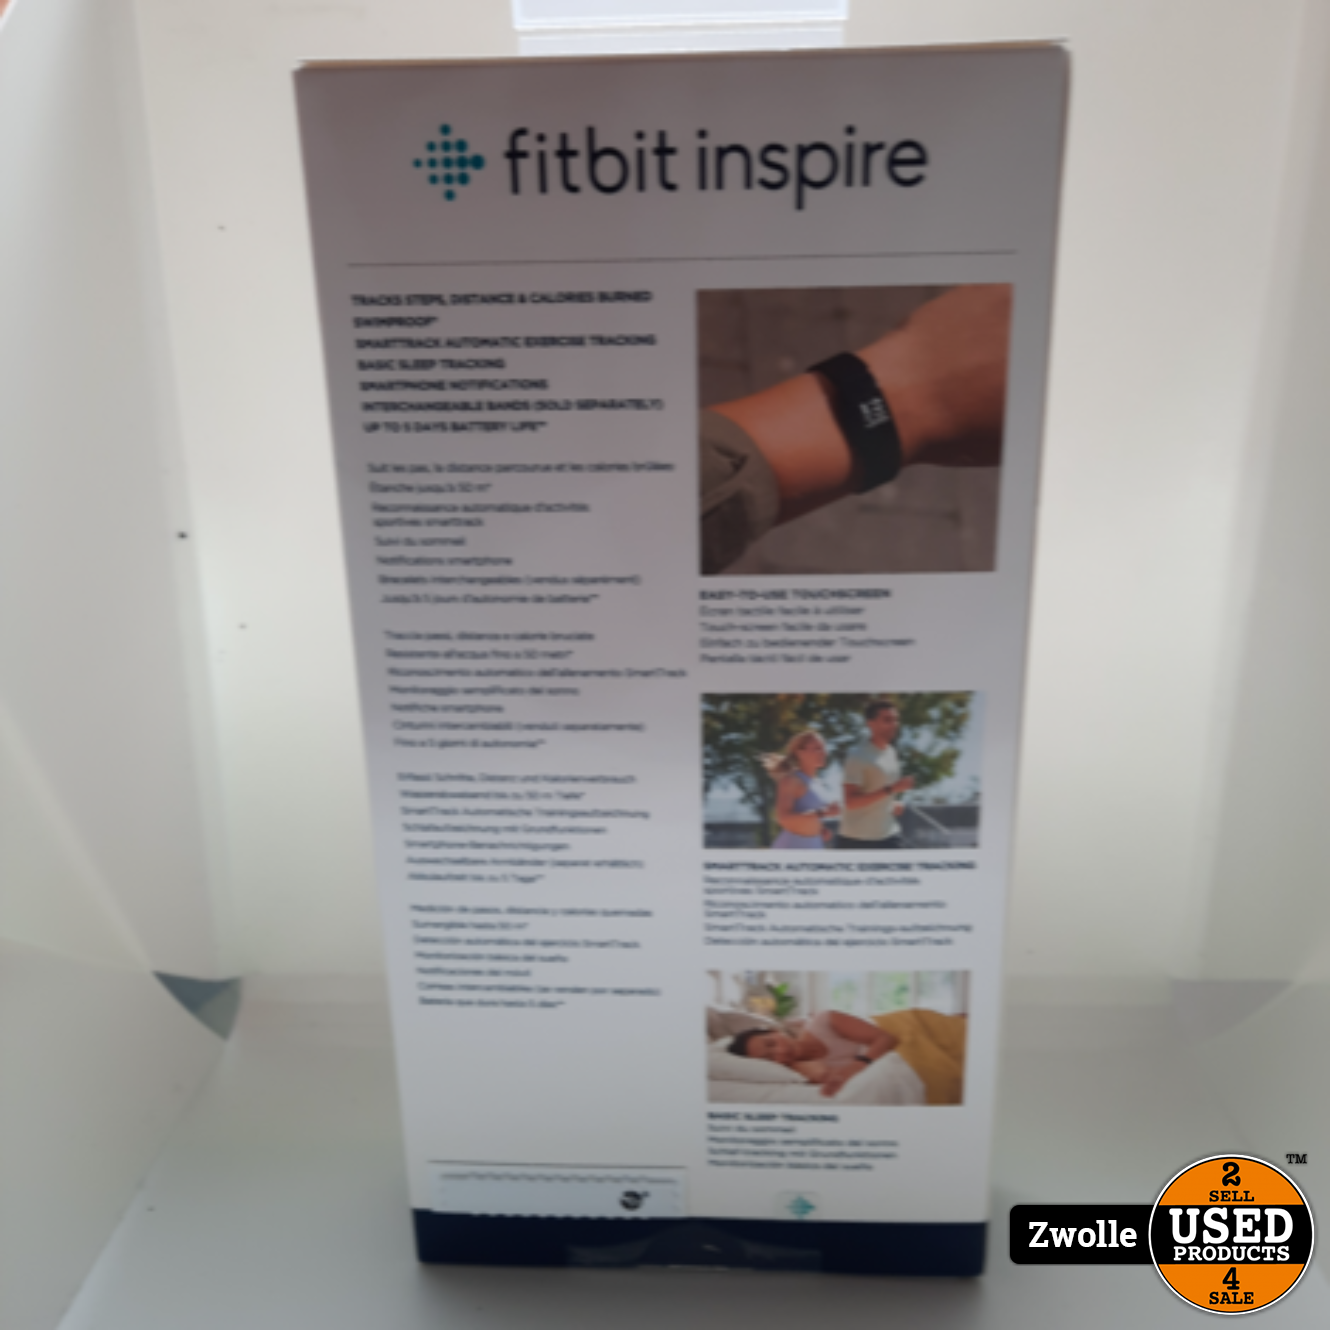 FITBIT 2 | nieuw in verpakking - Used Products Zwolle